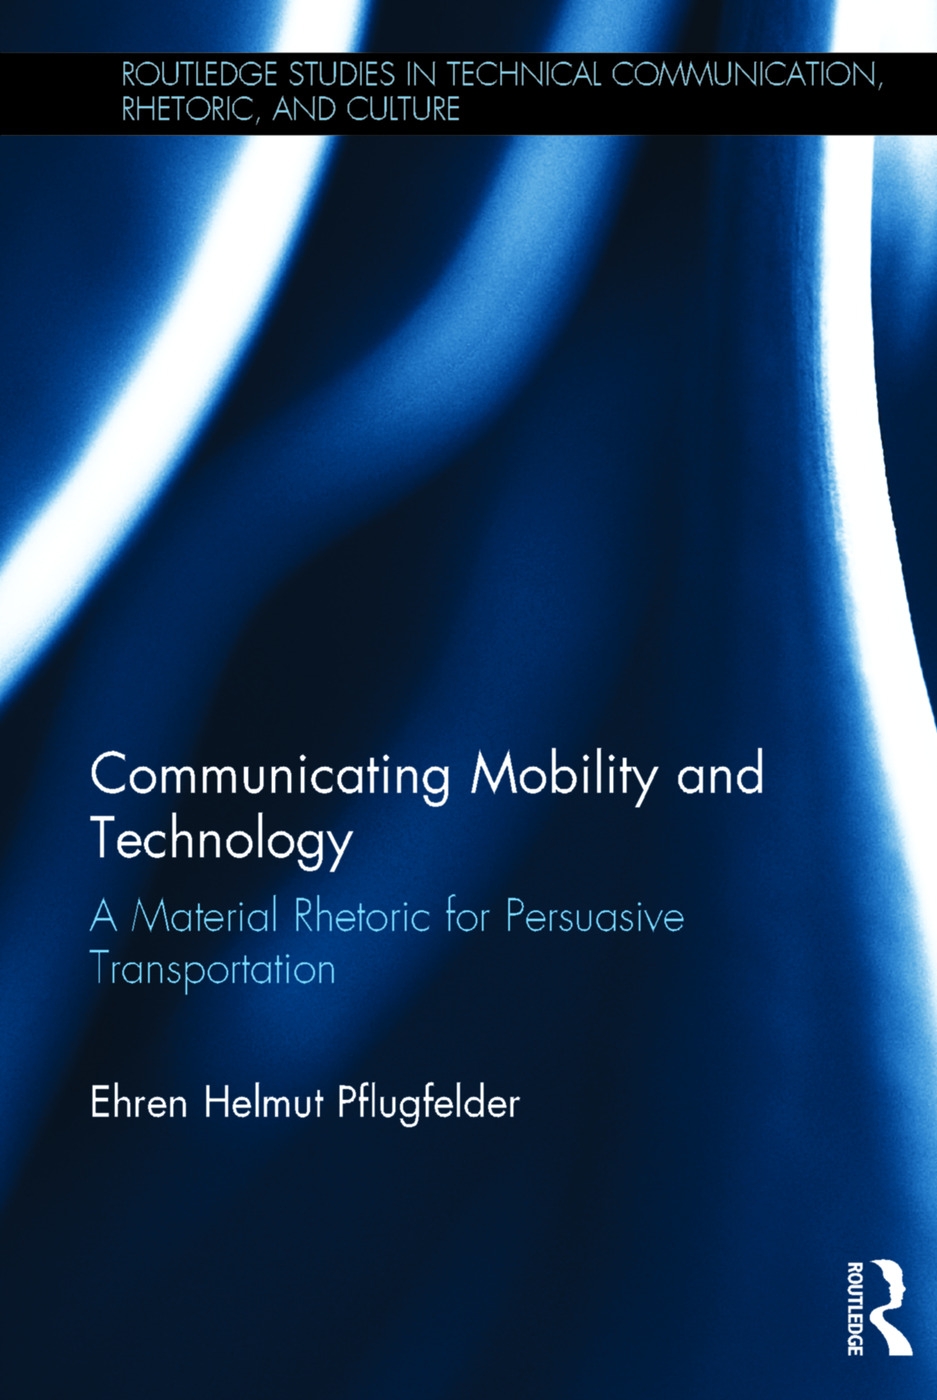 Communicating Mobility and Technology: A Material Rhetoric for Persuasive Transportation